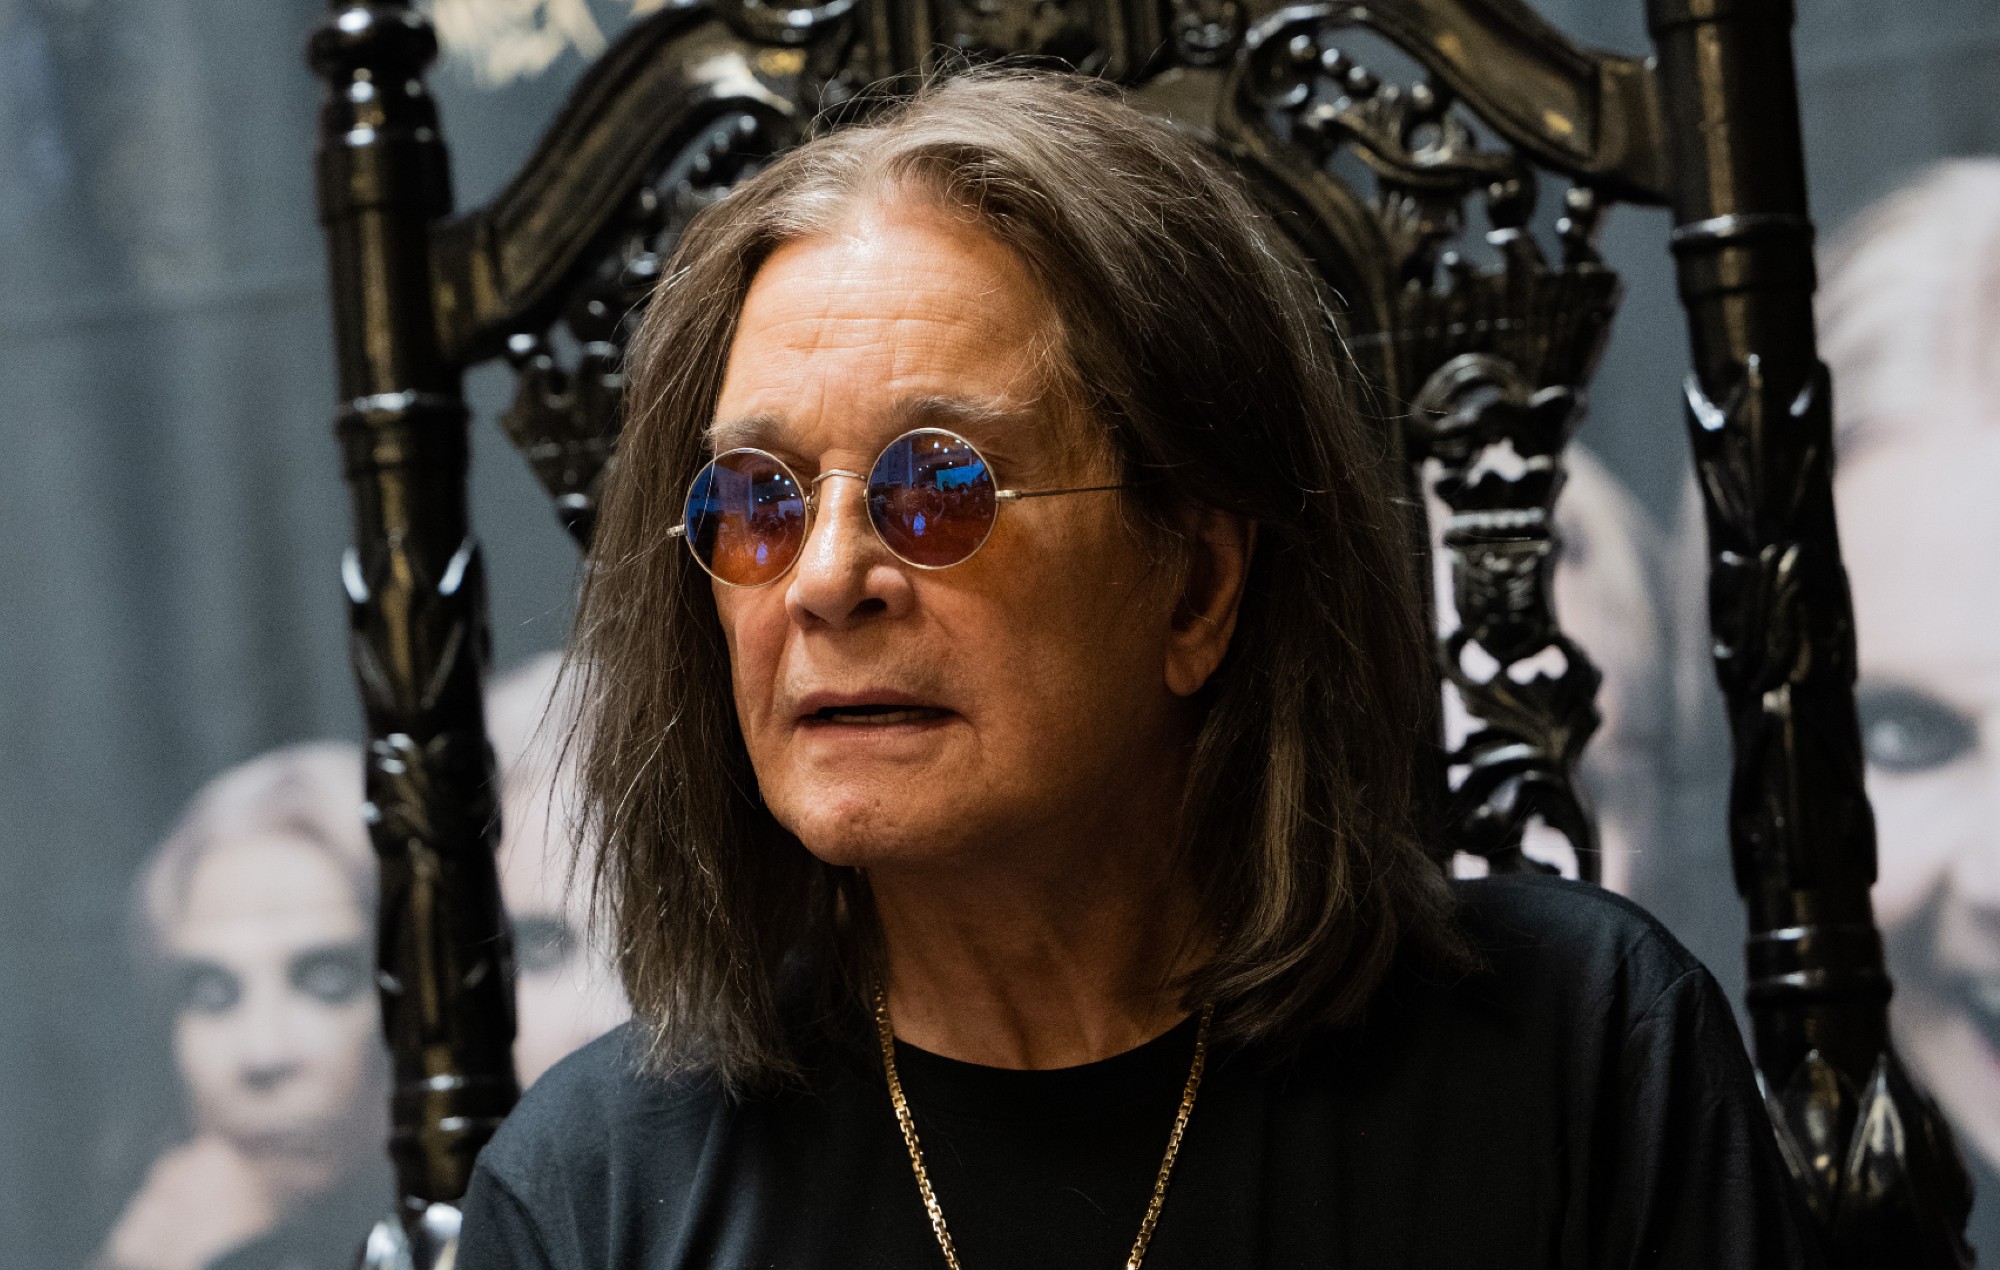 Ozzy Osbourne says ‘The Osbournes’ TV reboot will “never” happen “in a million years”